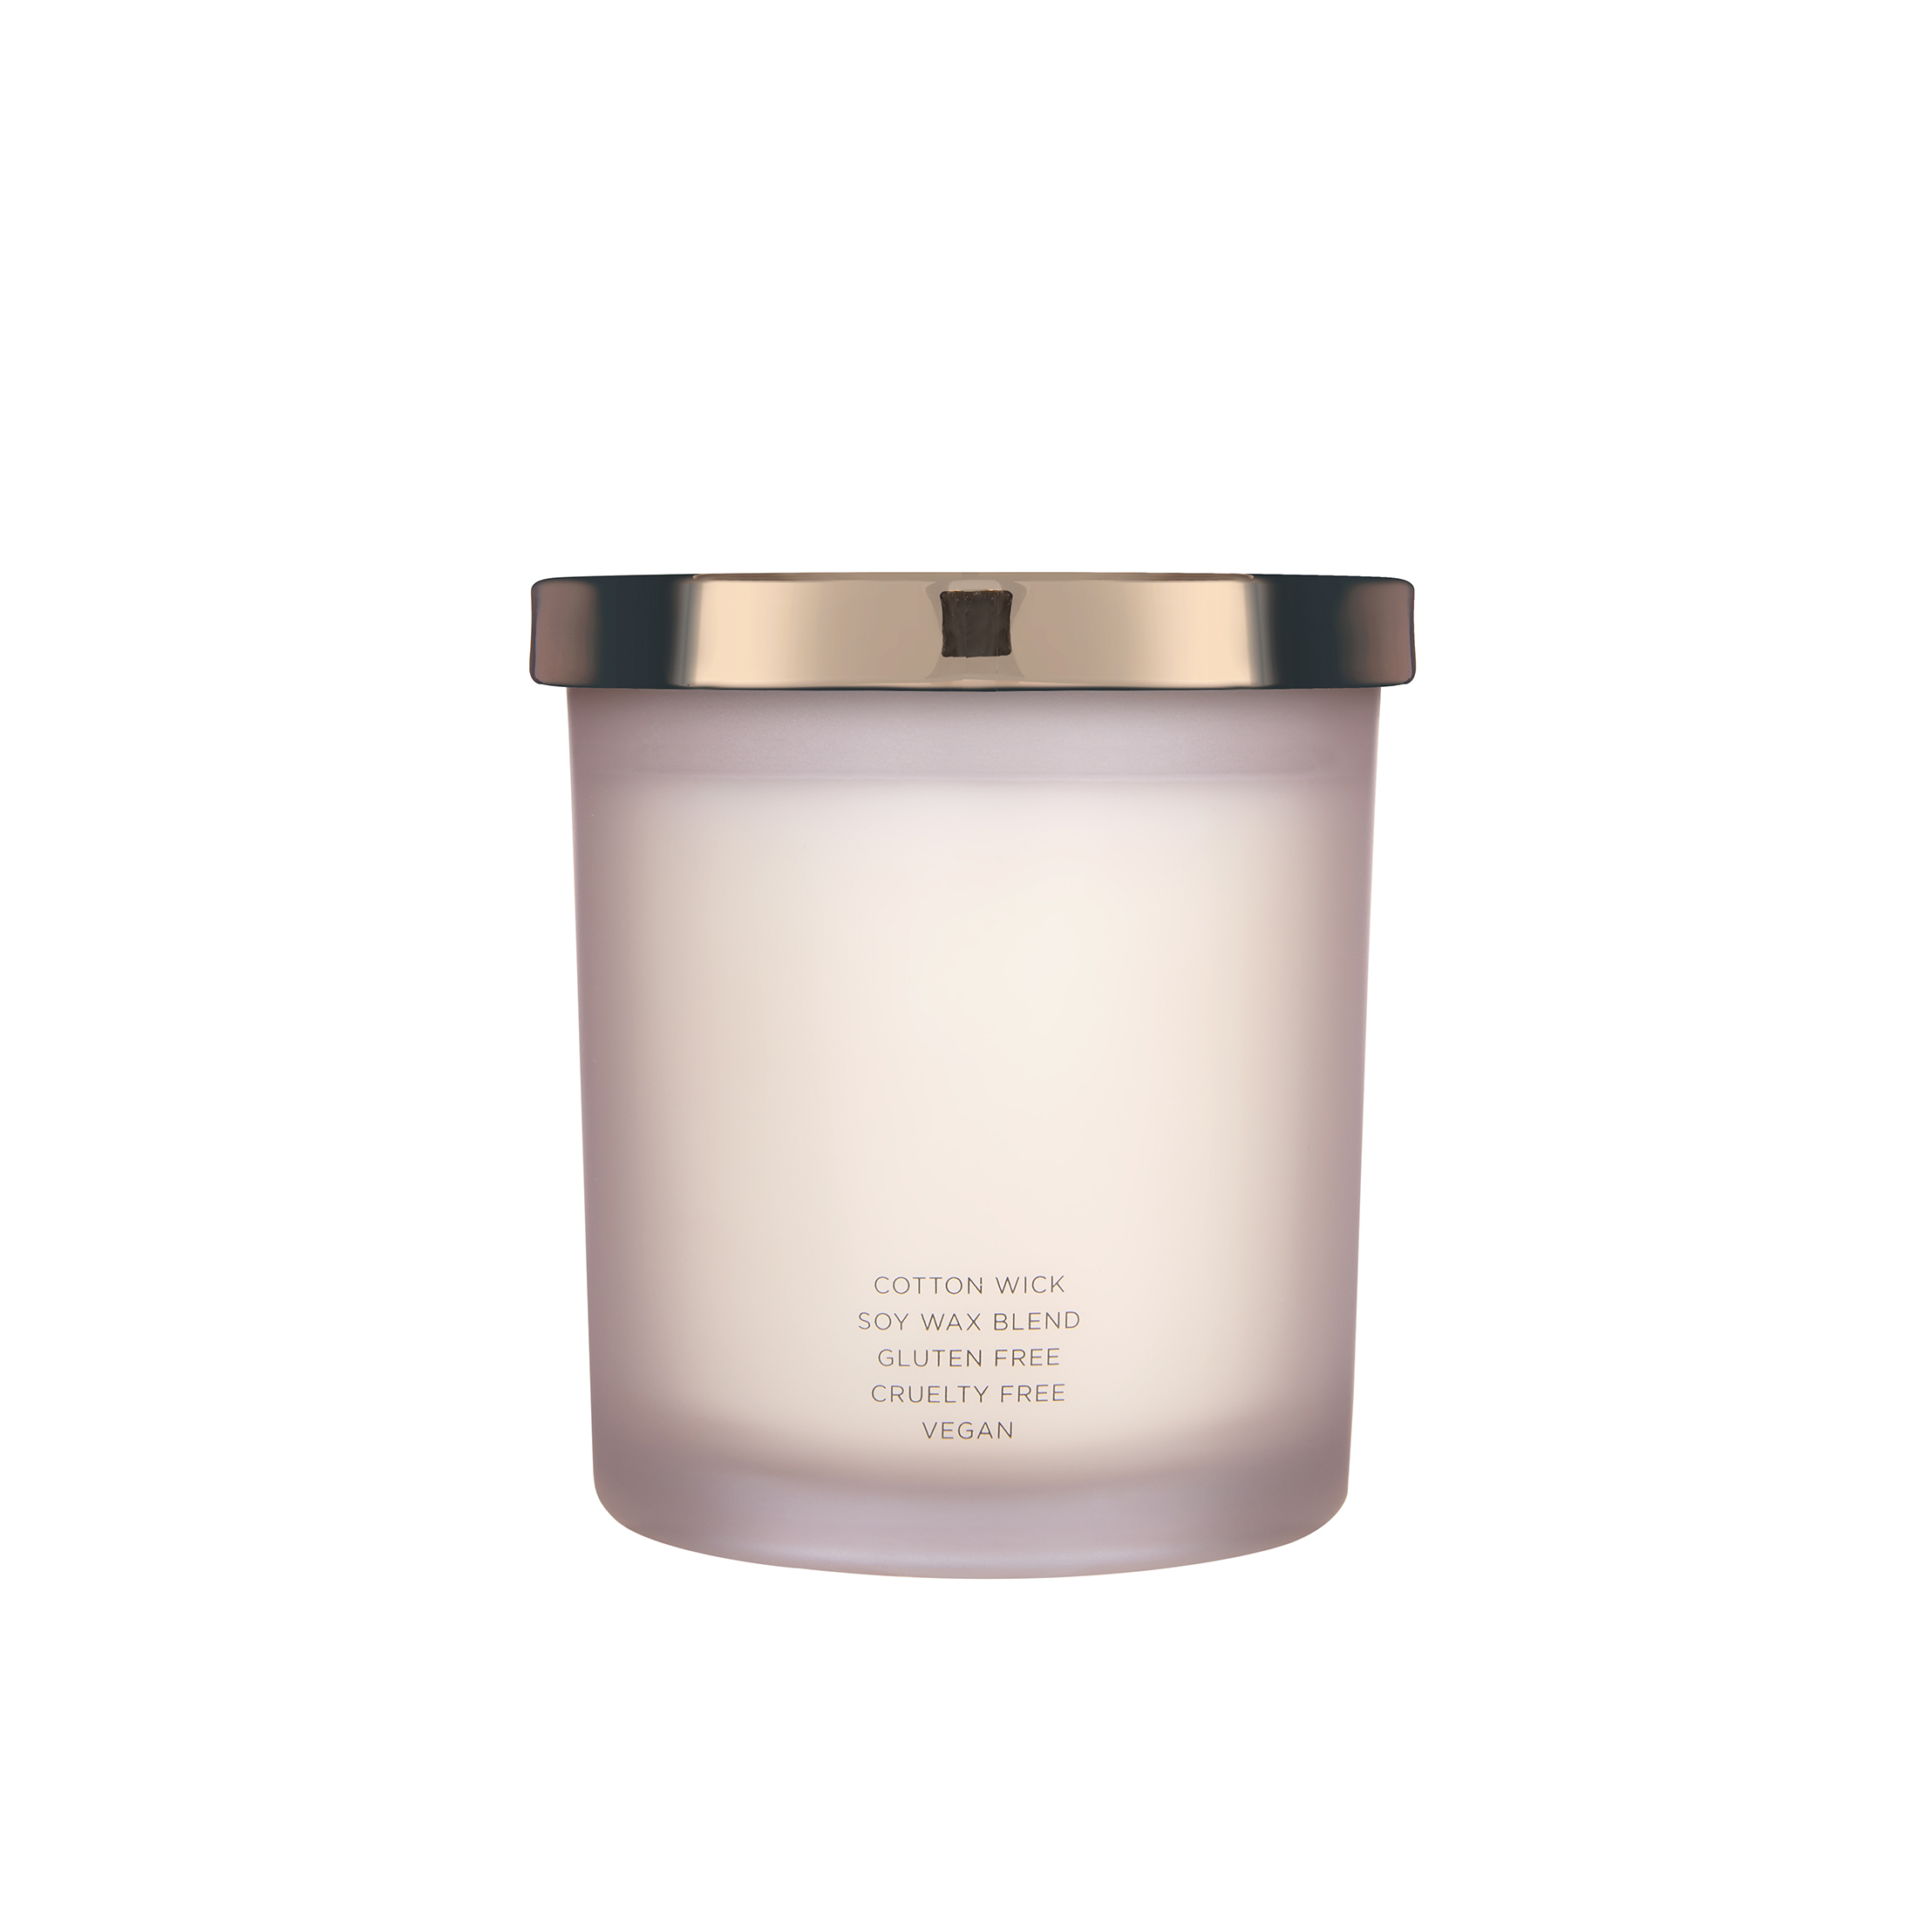 Hairitage Light Me Up Cherry & Amber Scented Candle | Cotton Wick & Soy Wax Blend, 7 oz. - image 2 of 7